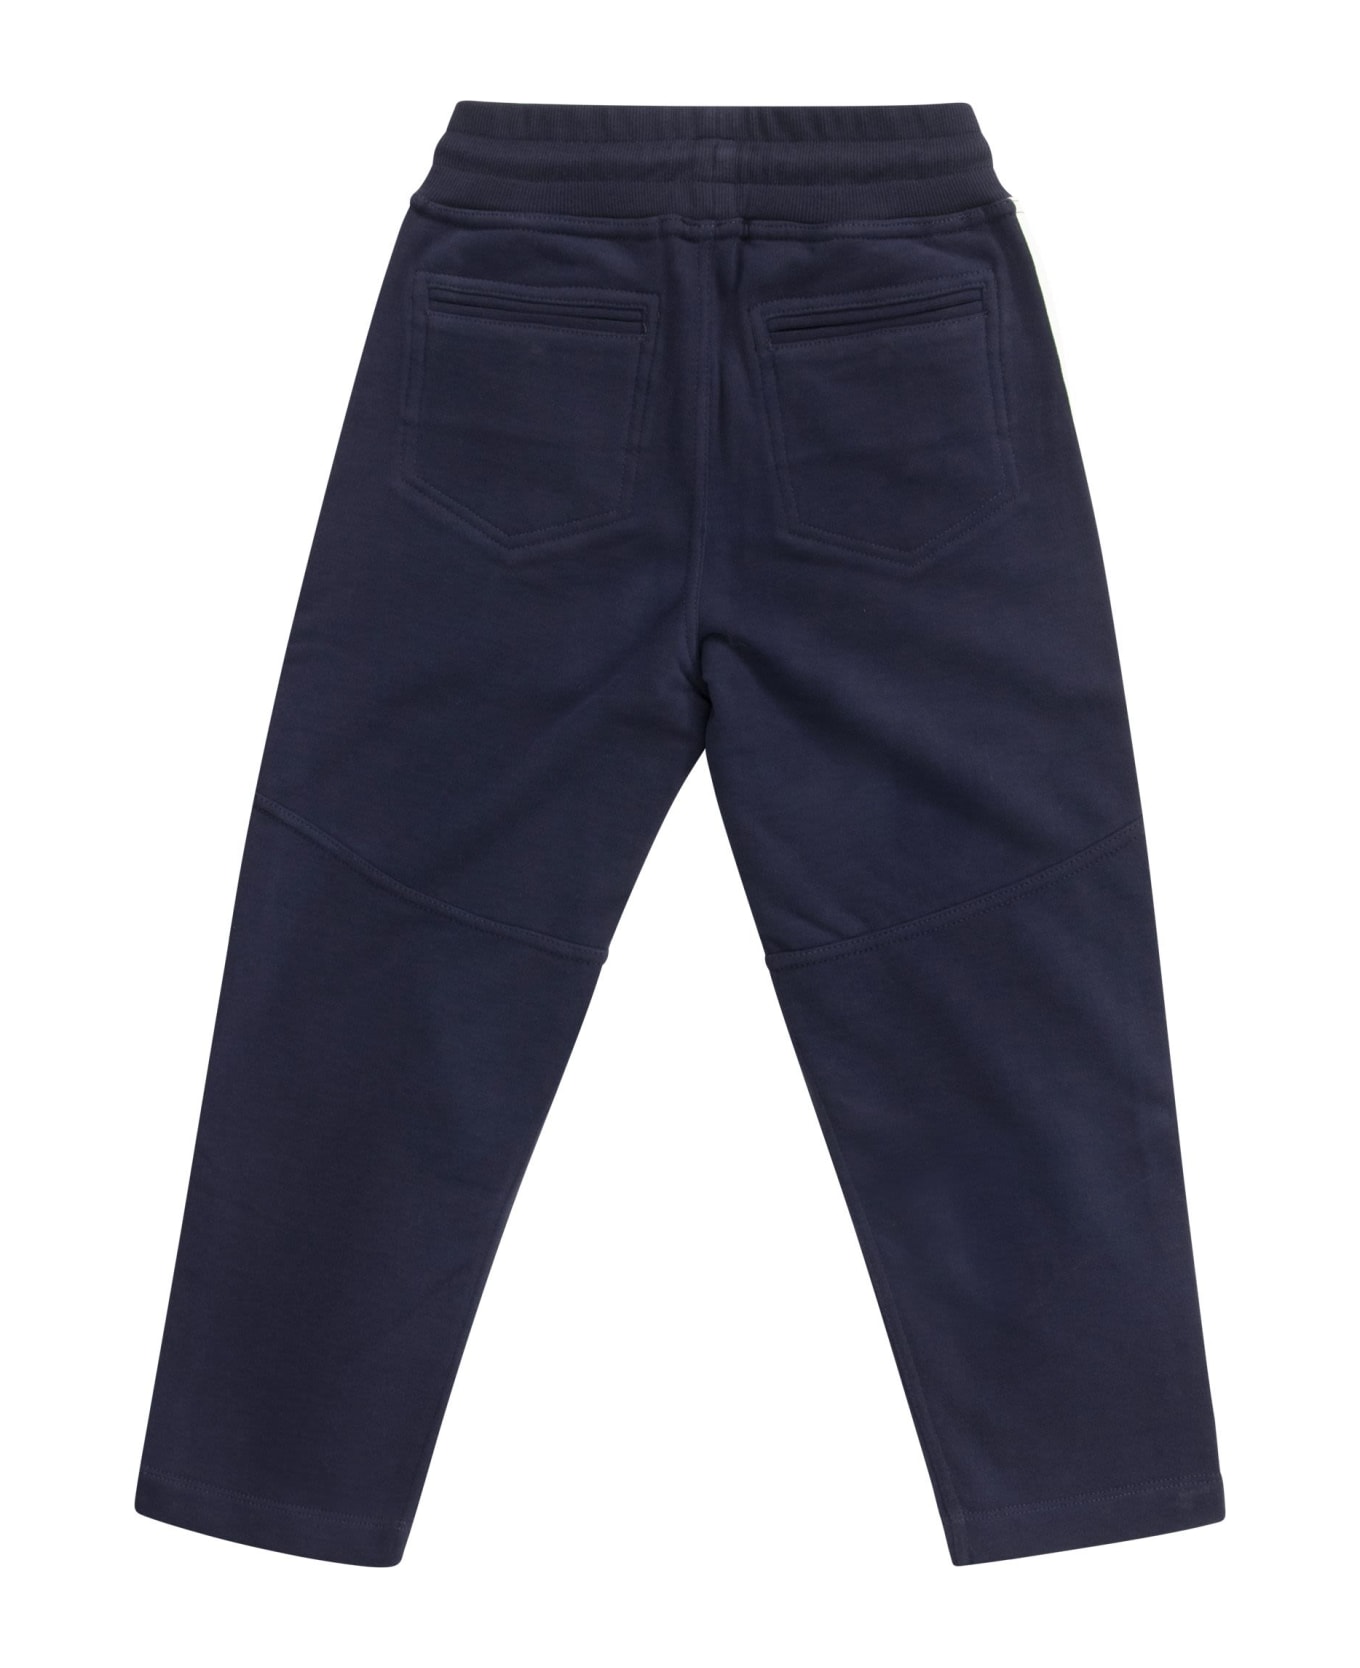 Brunello Cucinelli Cotton Fleece Trousers With Drawstring And Grosgrain Inserts - Navy Blue